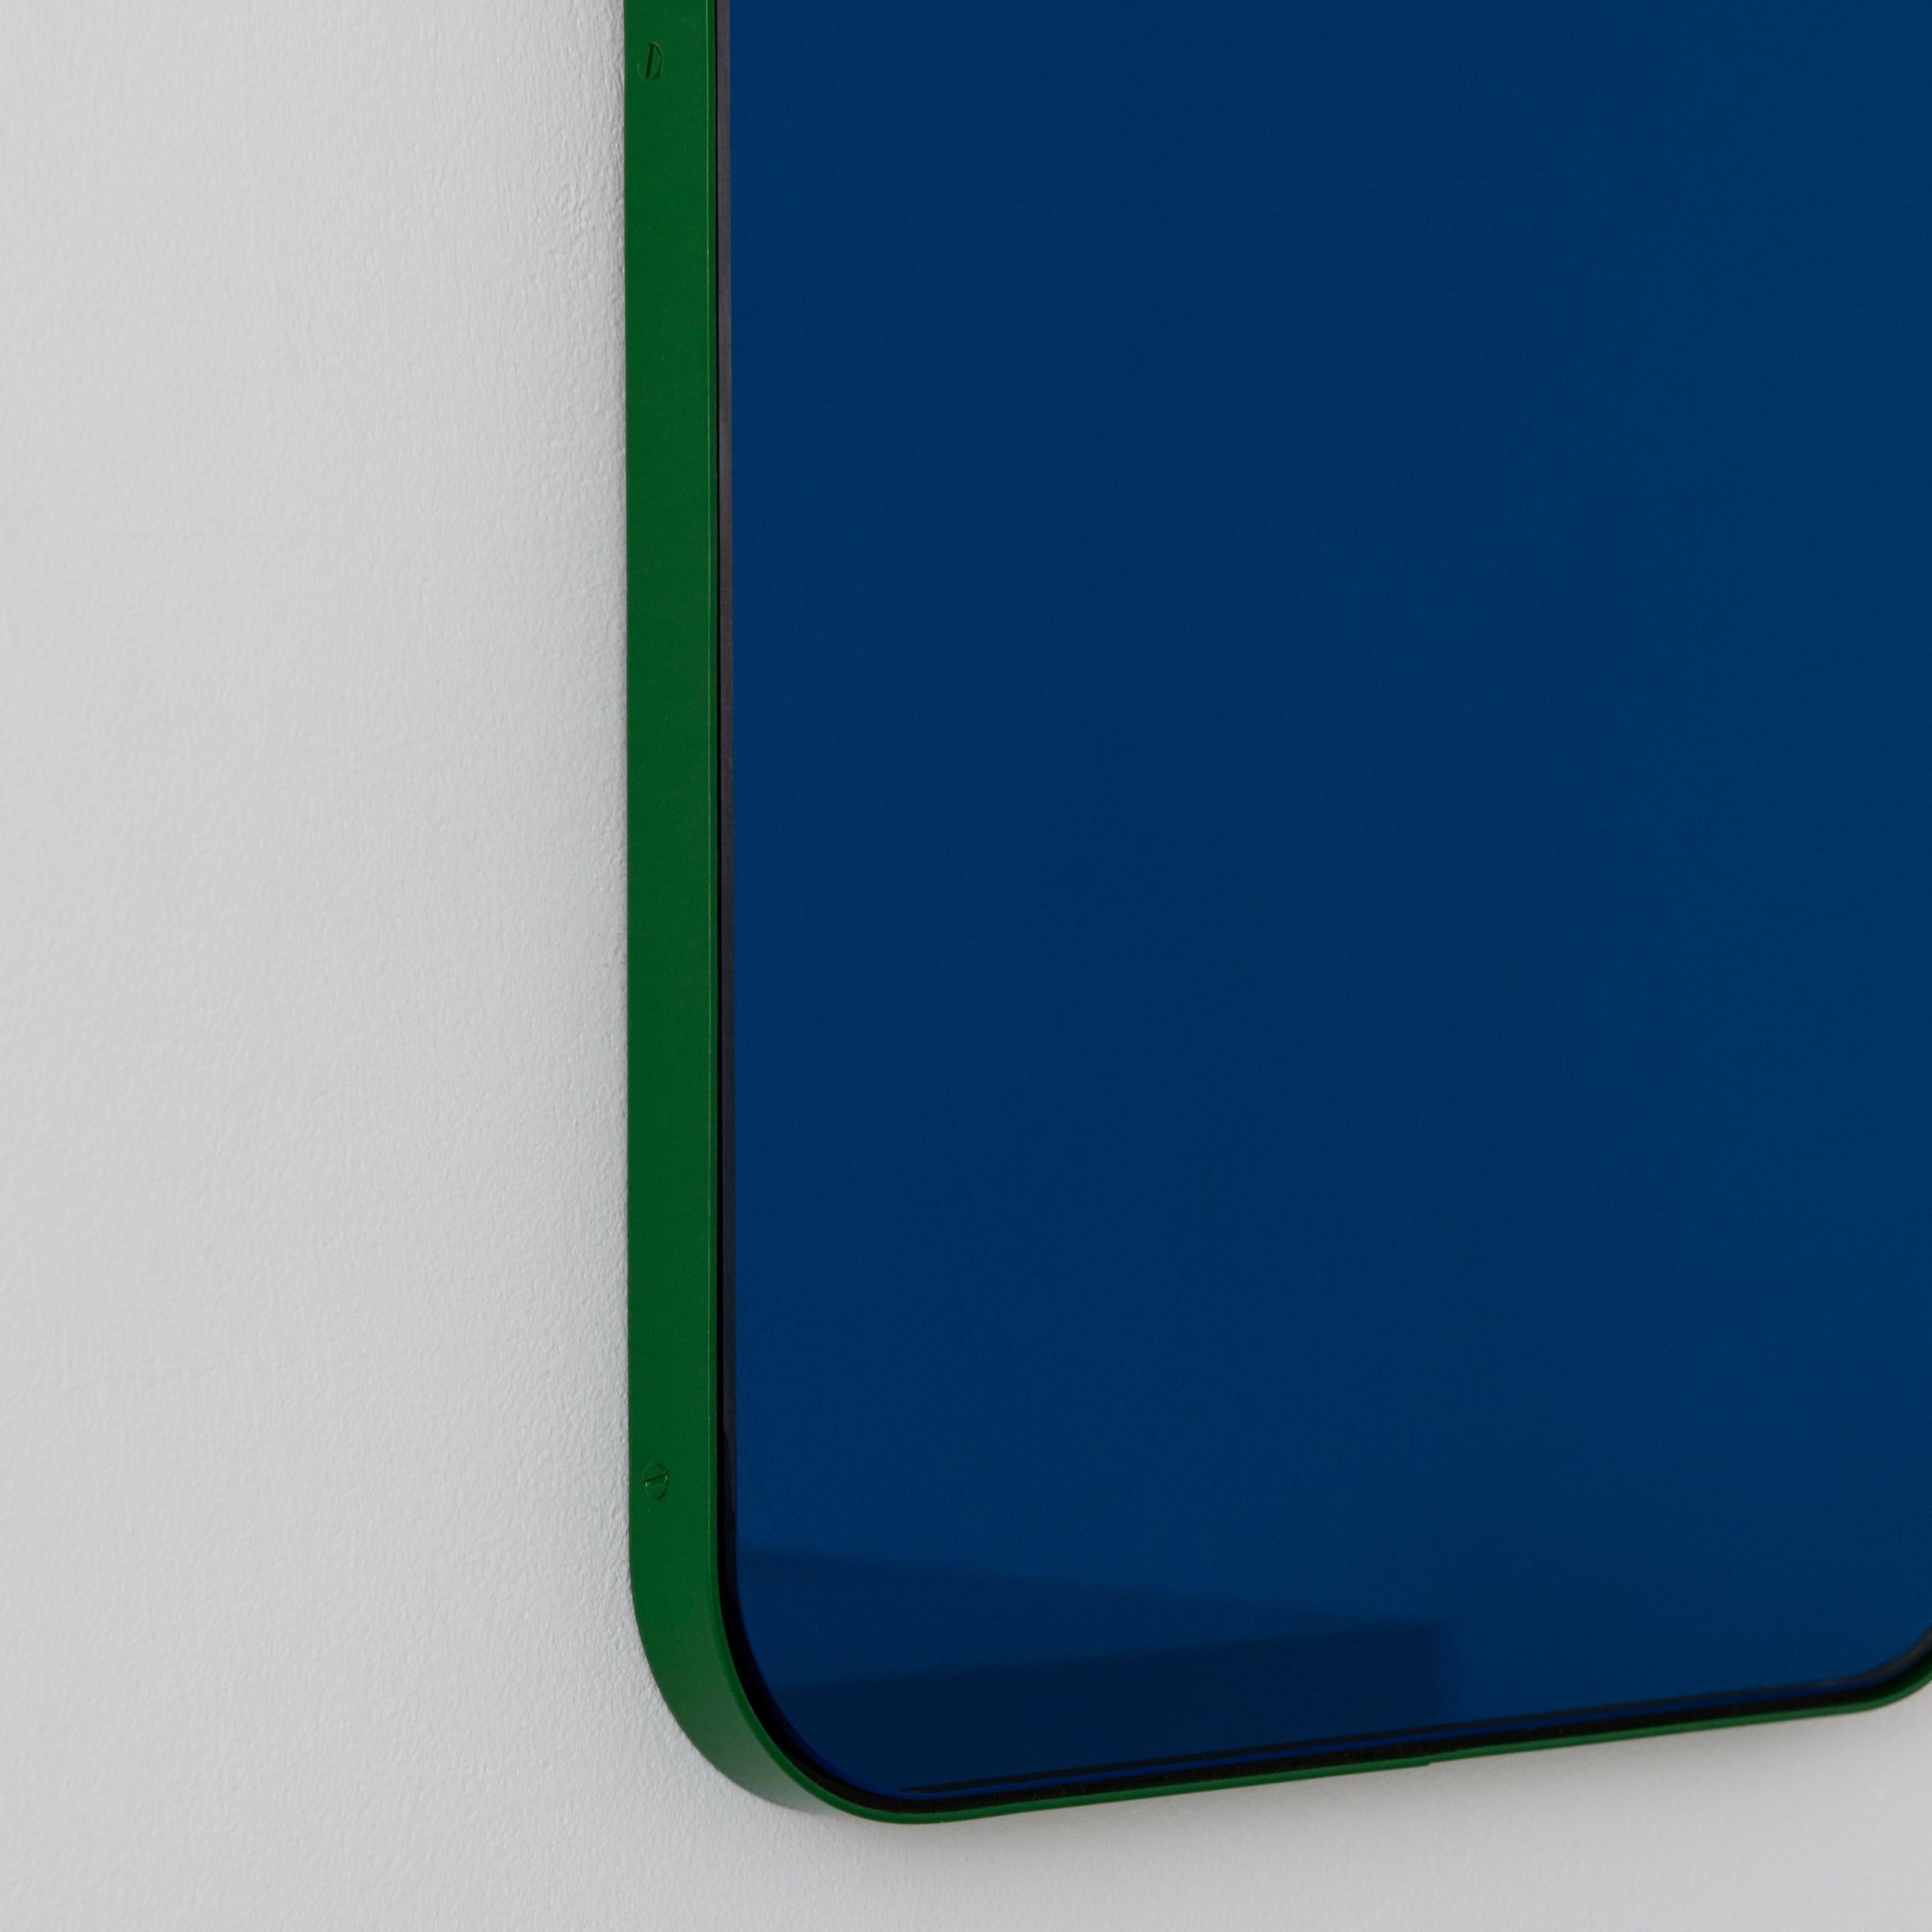 Aluminum Quadris Rectangular Contemporary Blue Mirror with a Modern Green Frame, Large For Sale